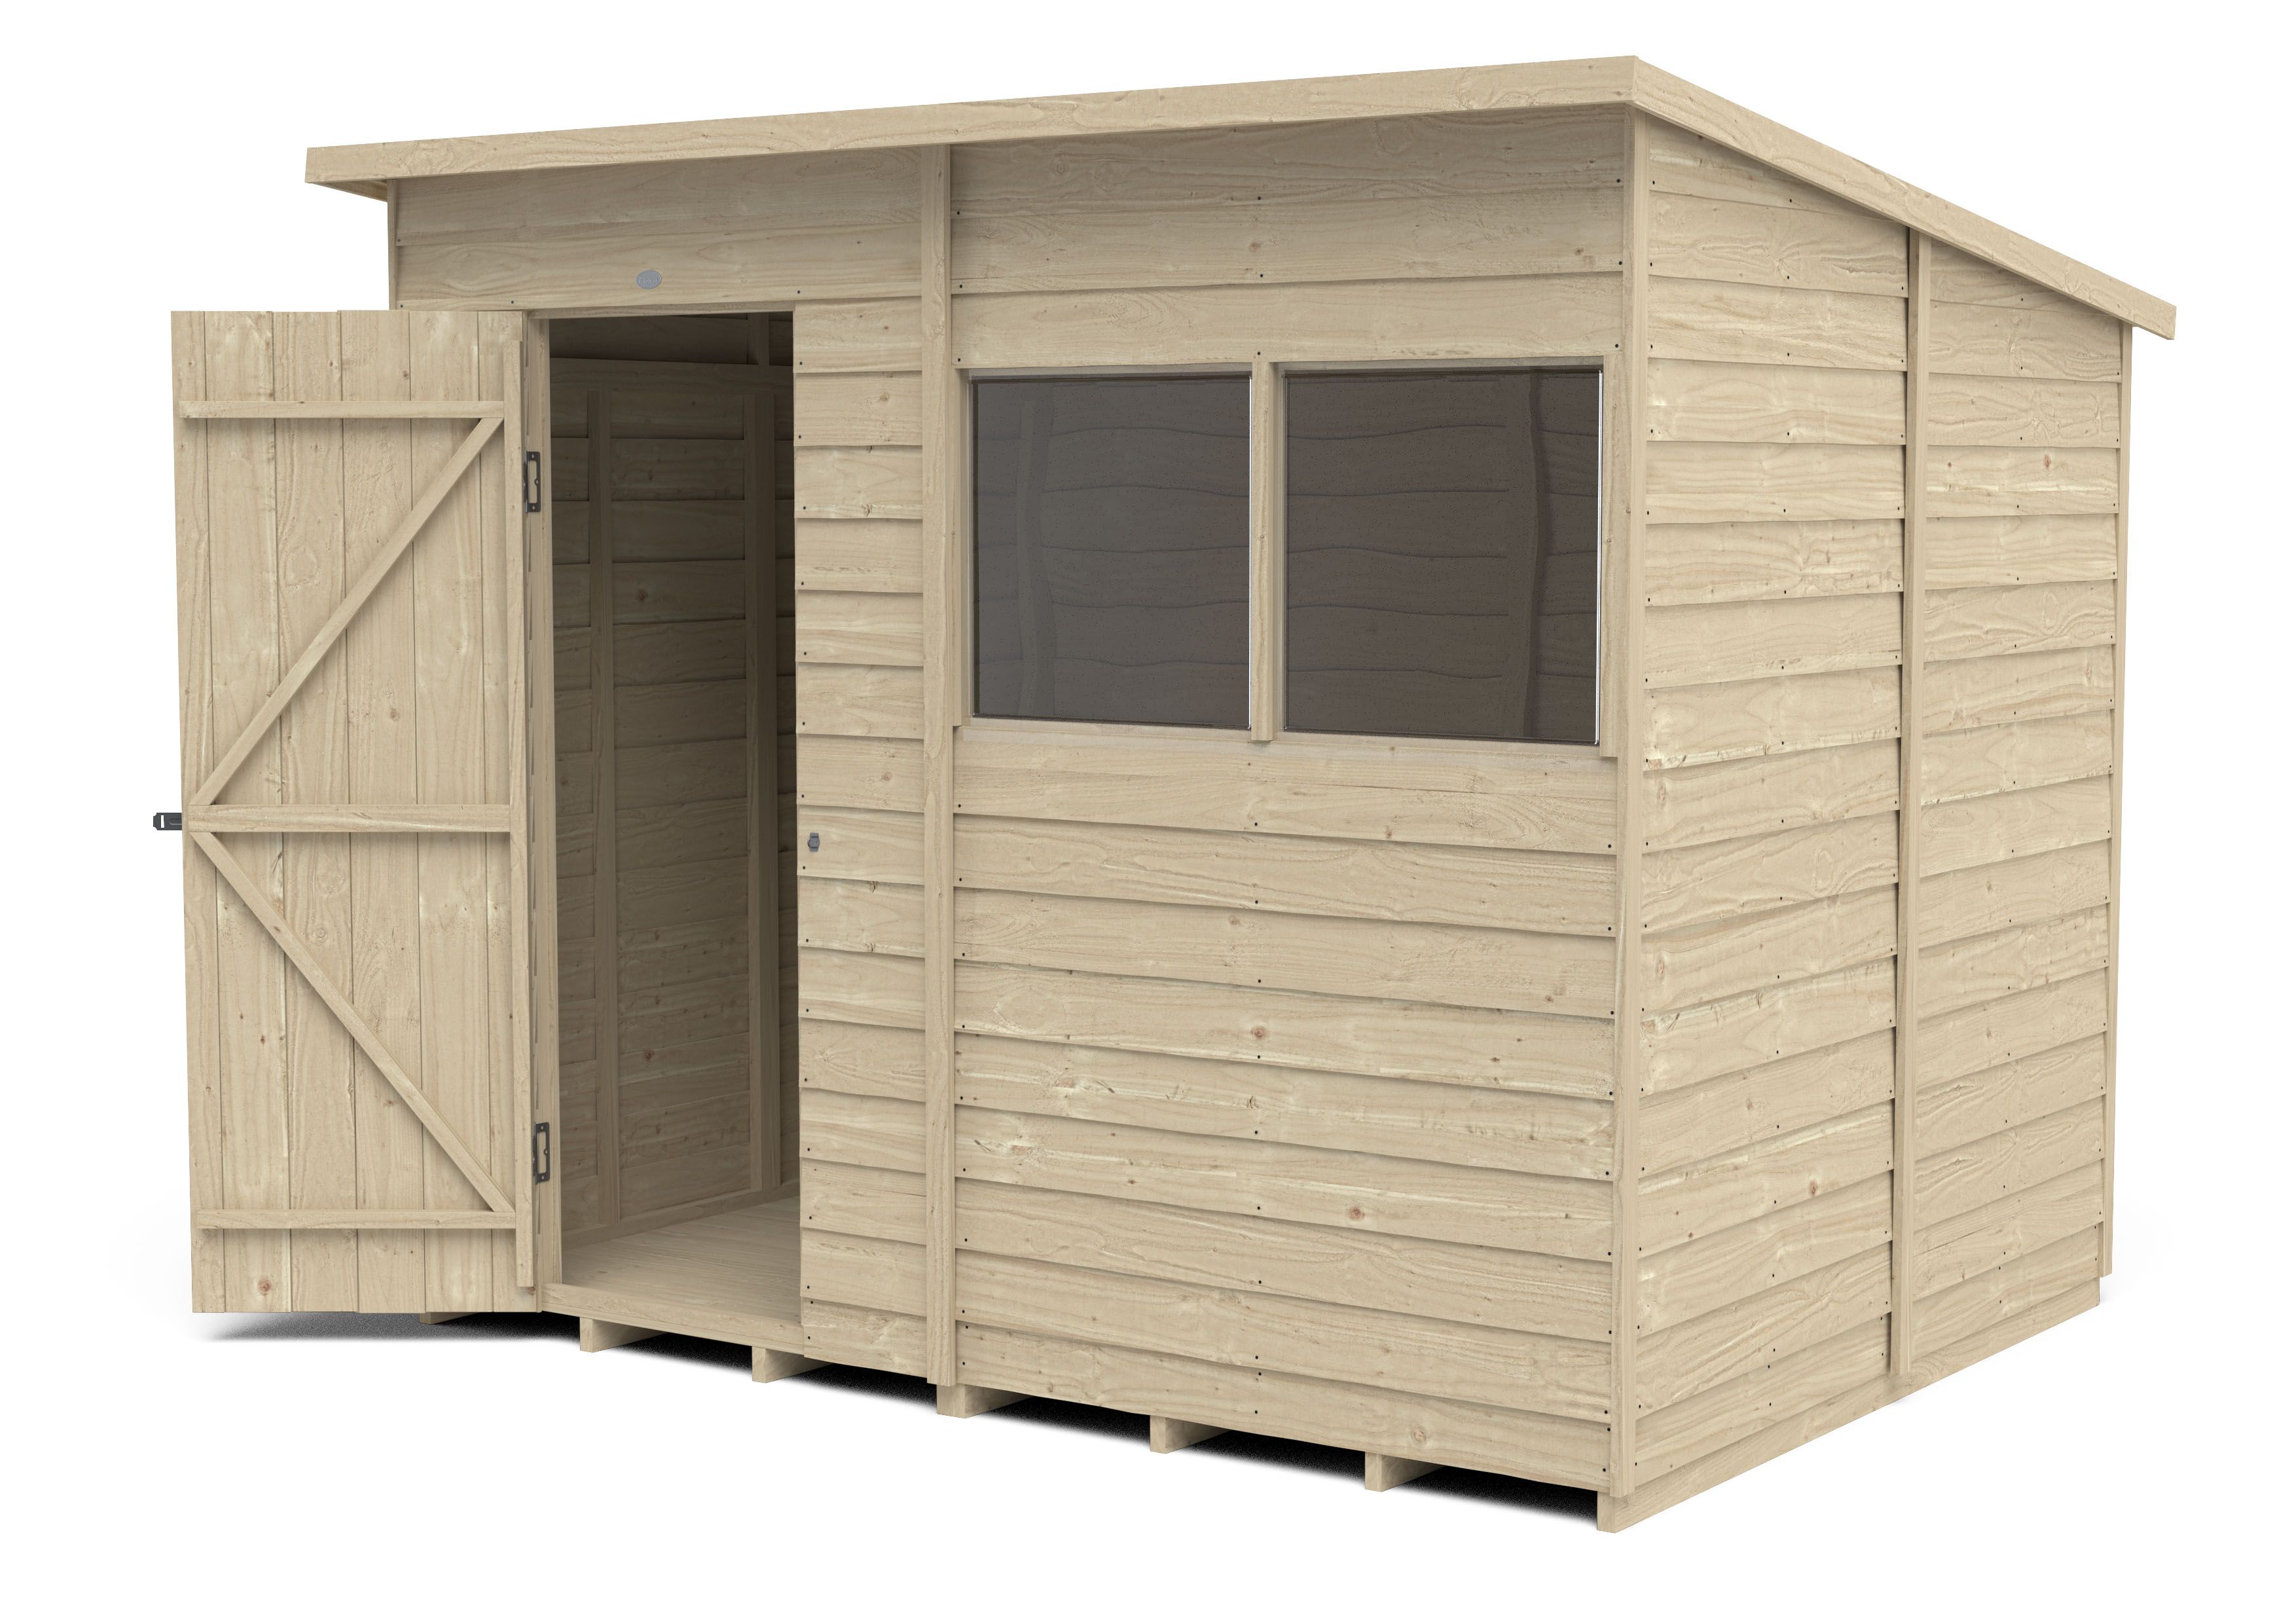 Forest Garden Overlap 8x6 ft Pent Wooden Shed with floor & 2 windows (Base included) - Assembly service included